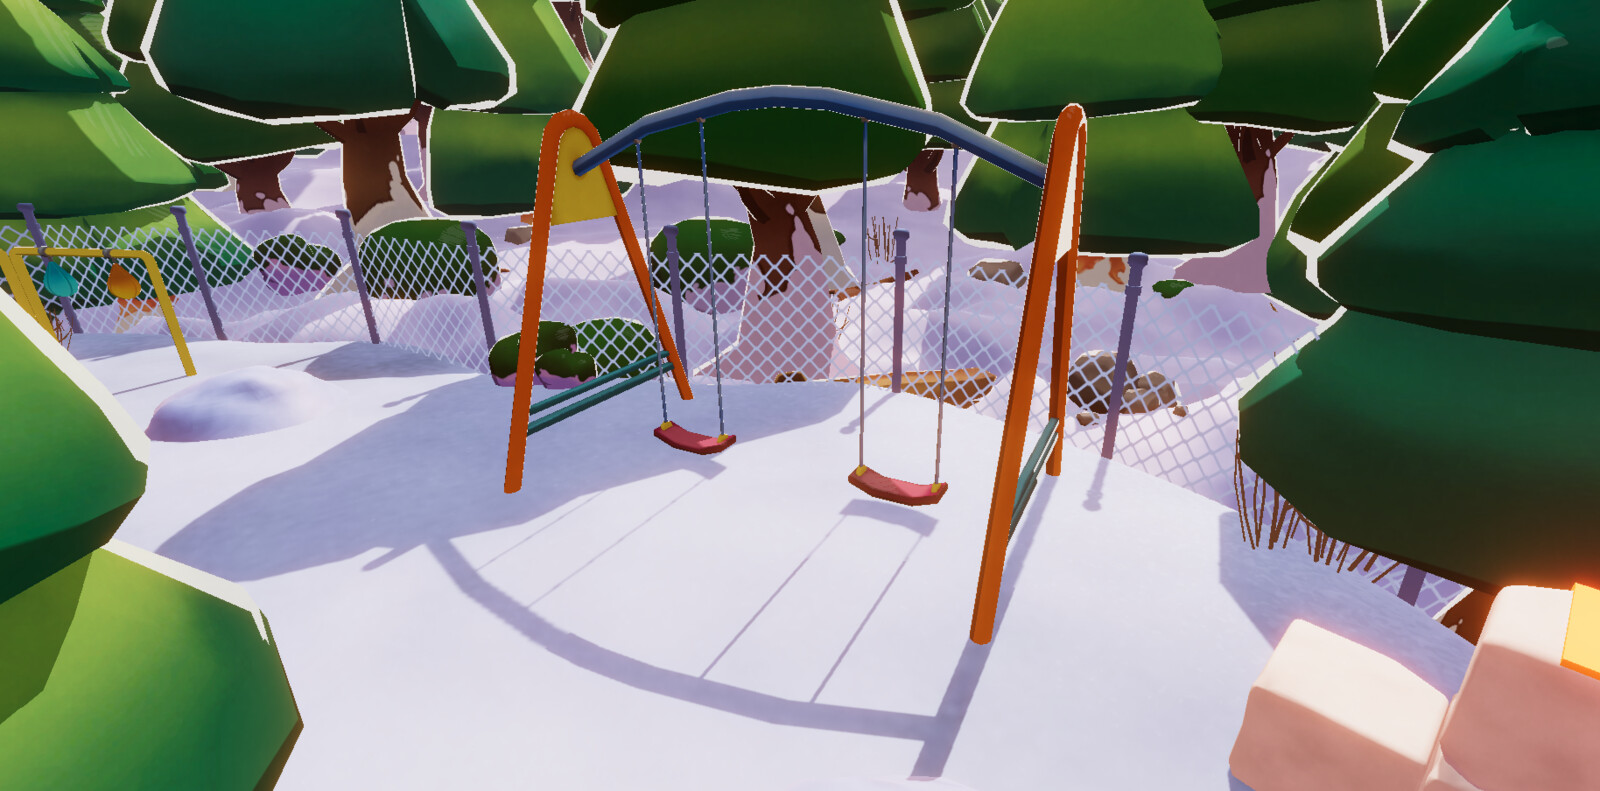 In-game swing